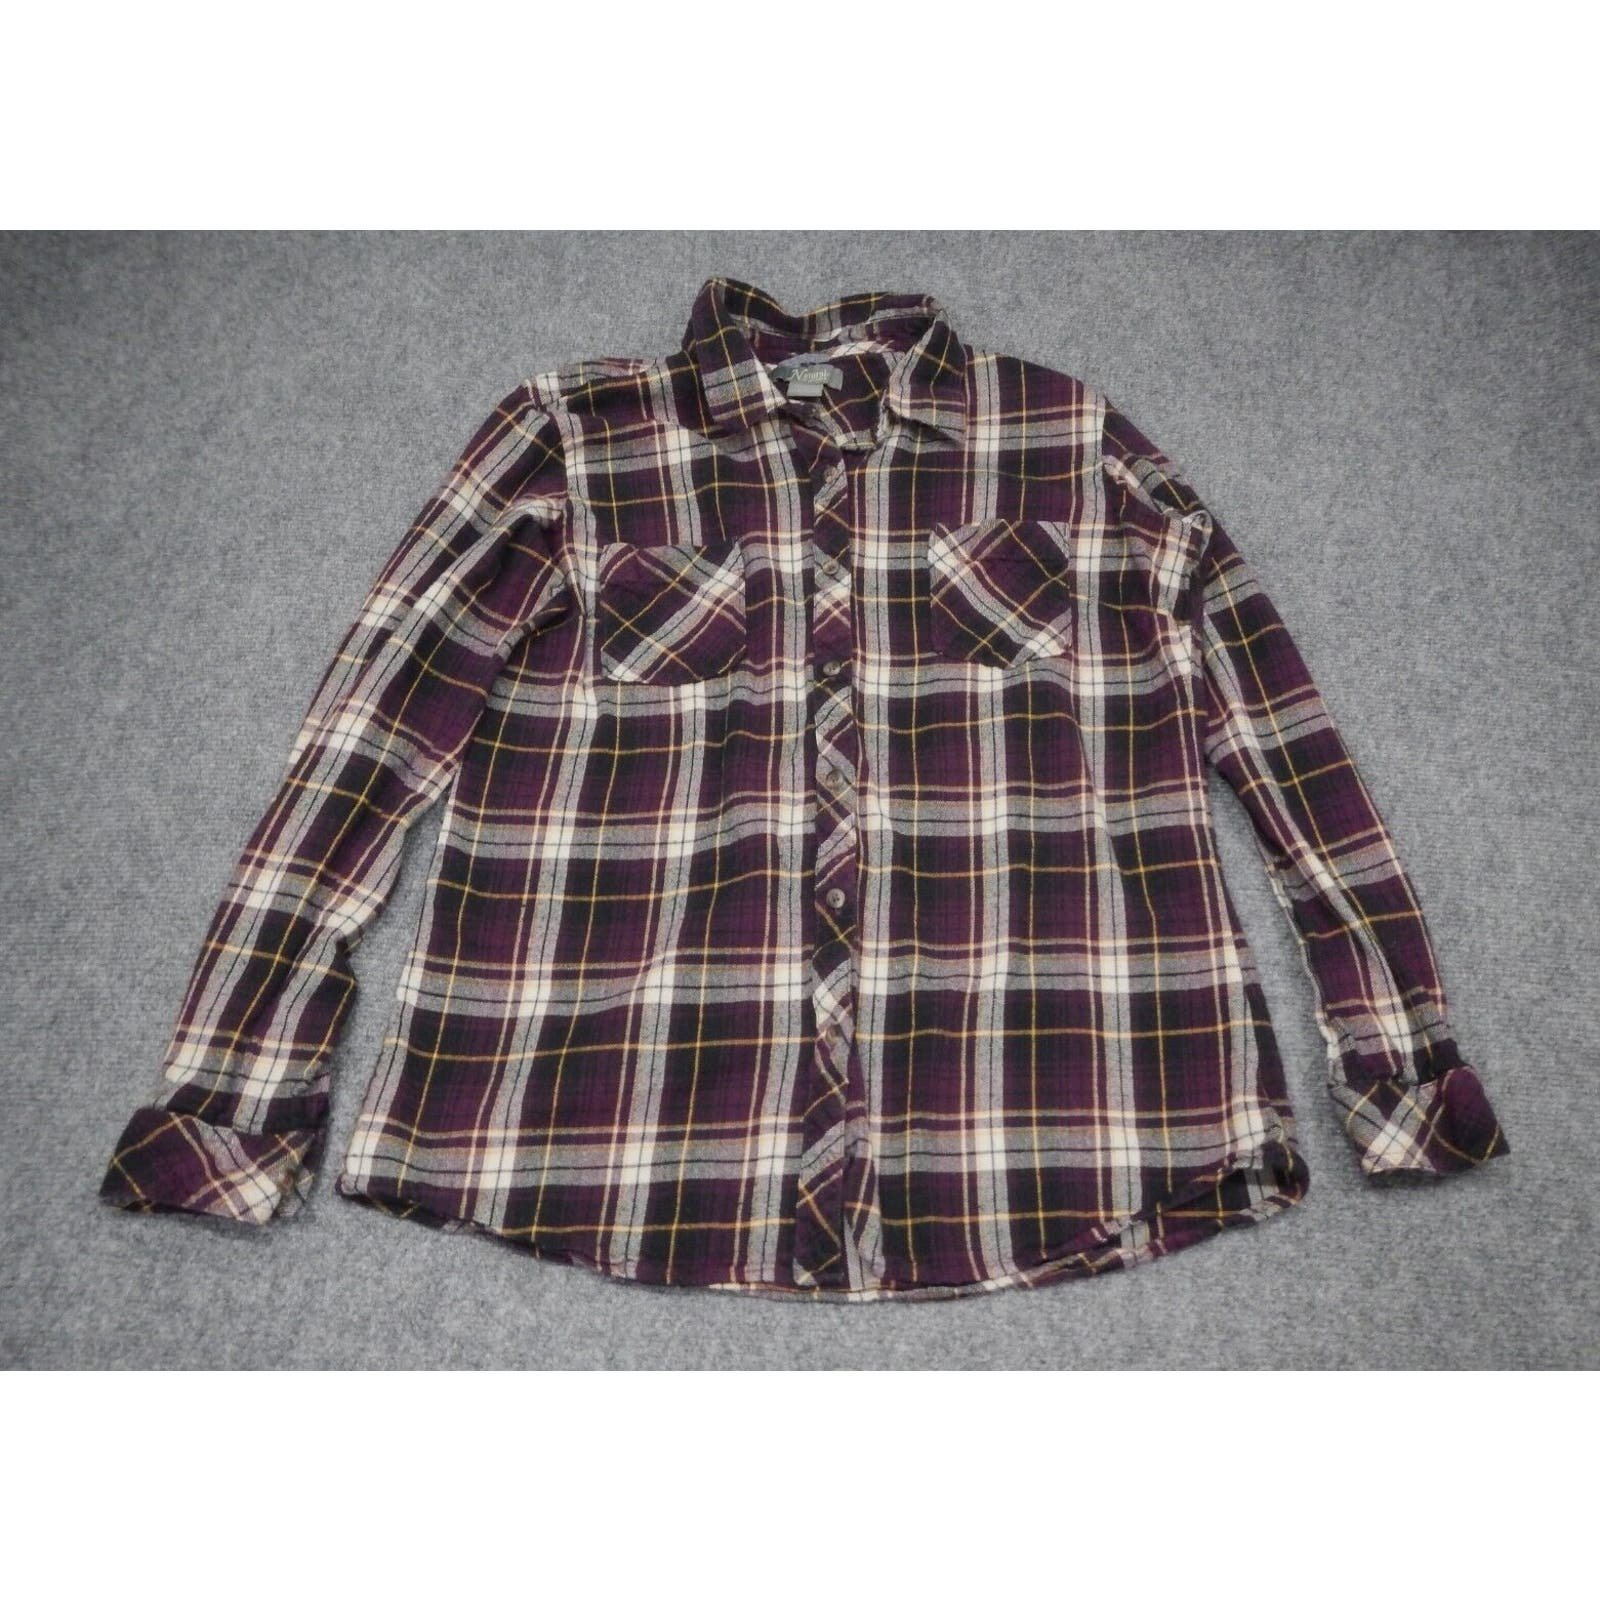 Beautiful Natural Reflections Flannel Shirt Women´s Size Large Purple White Plaid Button U GHnCJrdys Cool